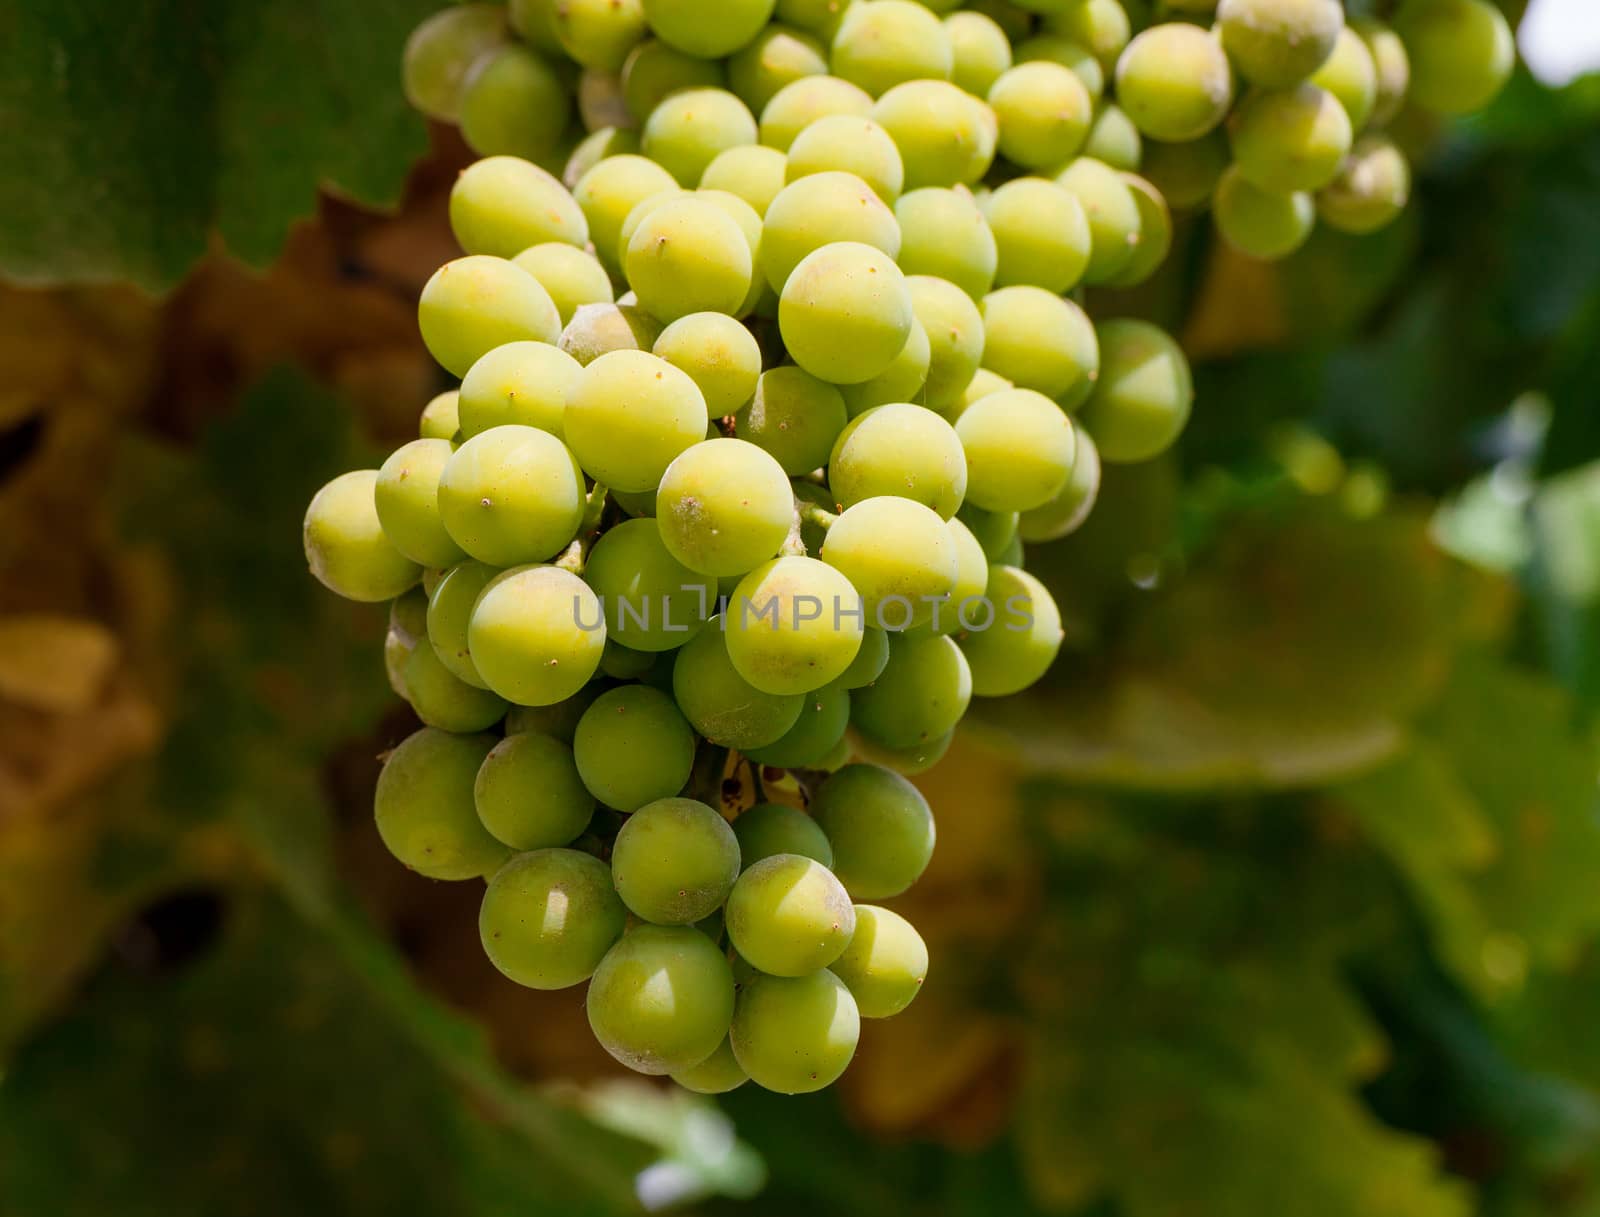 Bunch of green grapes on grapevine in vineyard by Discovod